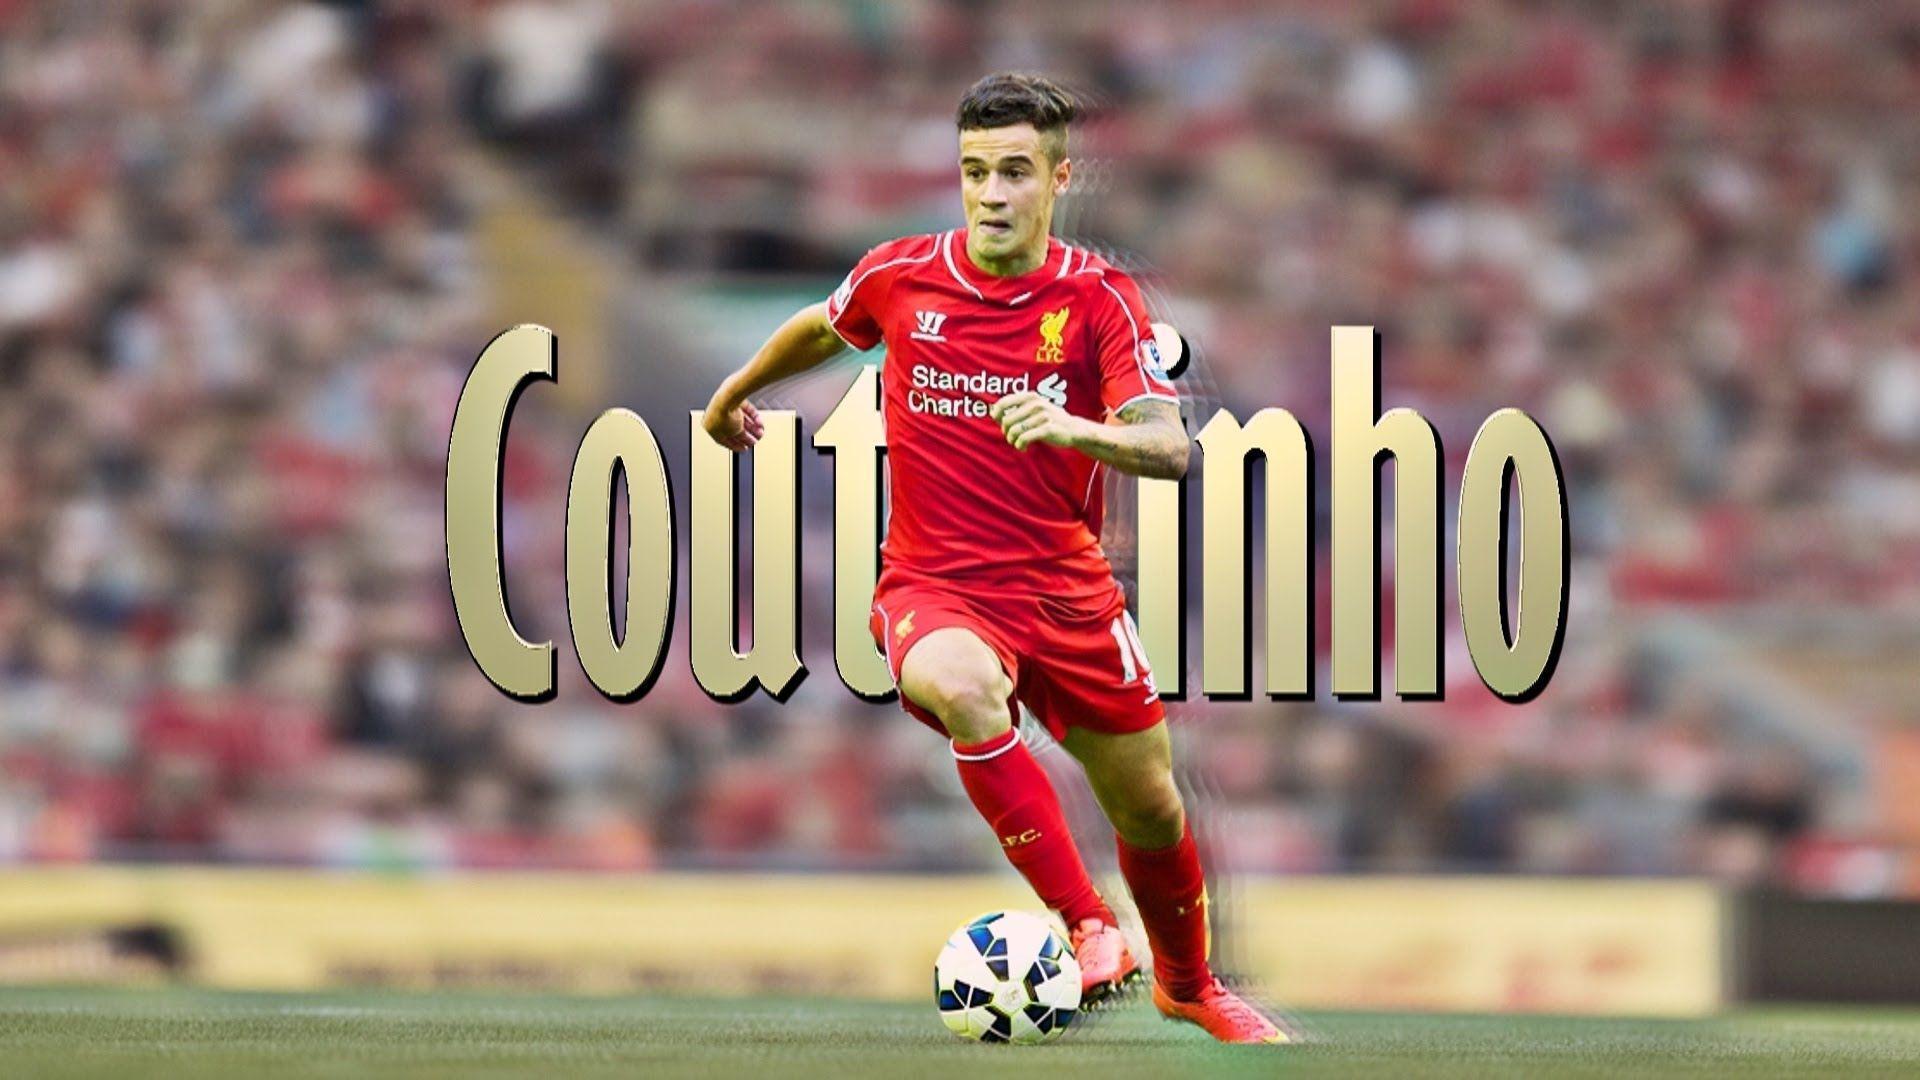 Liverpool Philippe Coutinho Wallpaper: Players, Teams, Leagues